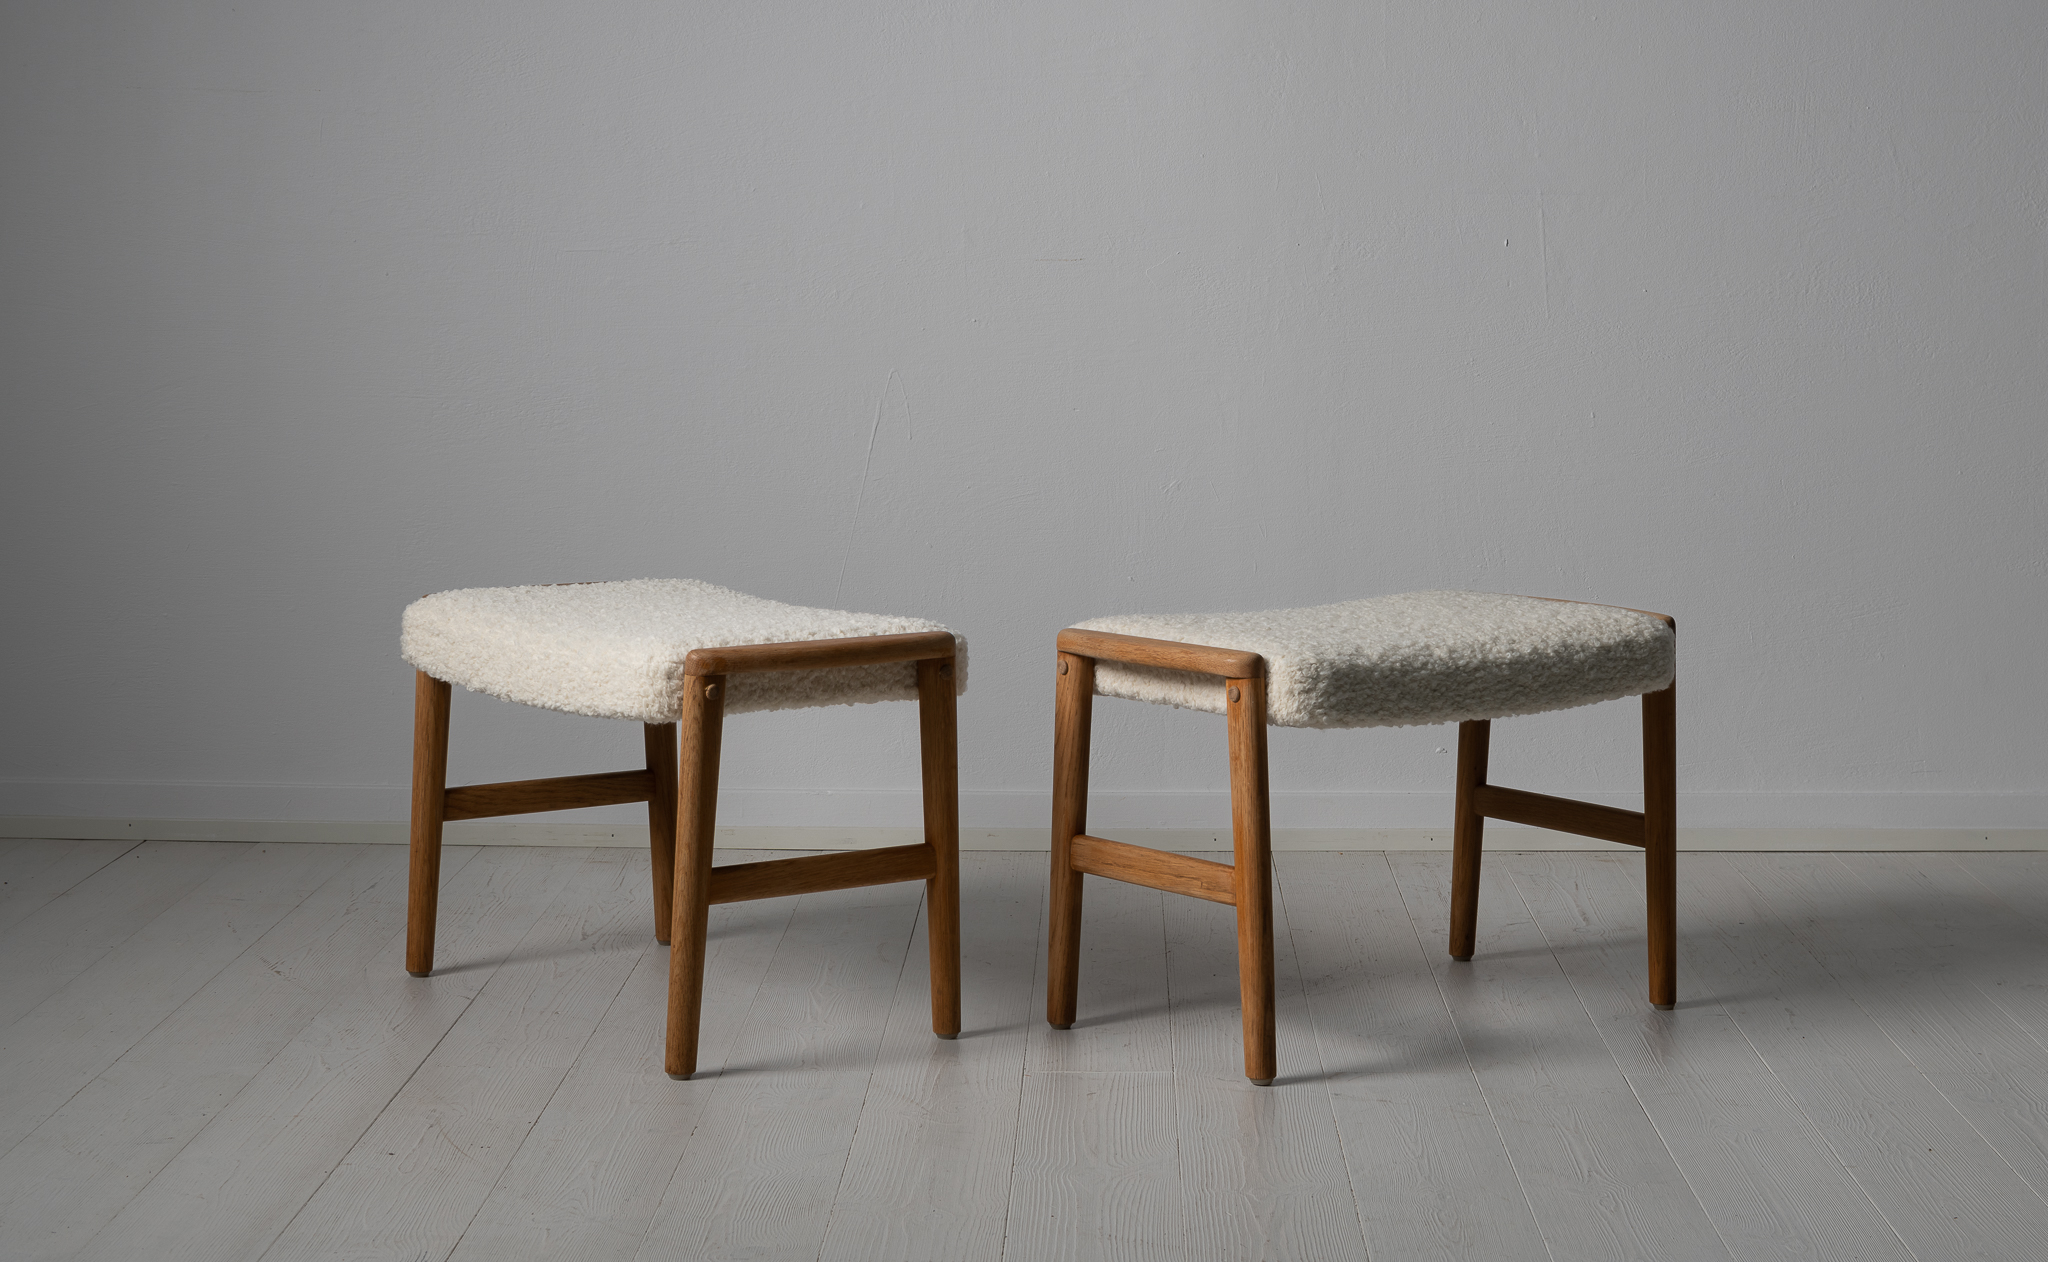 Scandinavian modern oak footstools from Sweden made around the 1960s. The stools are oak and newly upholstered. The cushions are upholstered with a special kind of white bouclé fabric